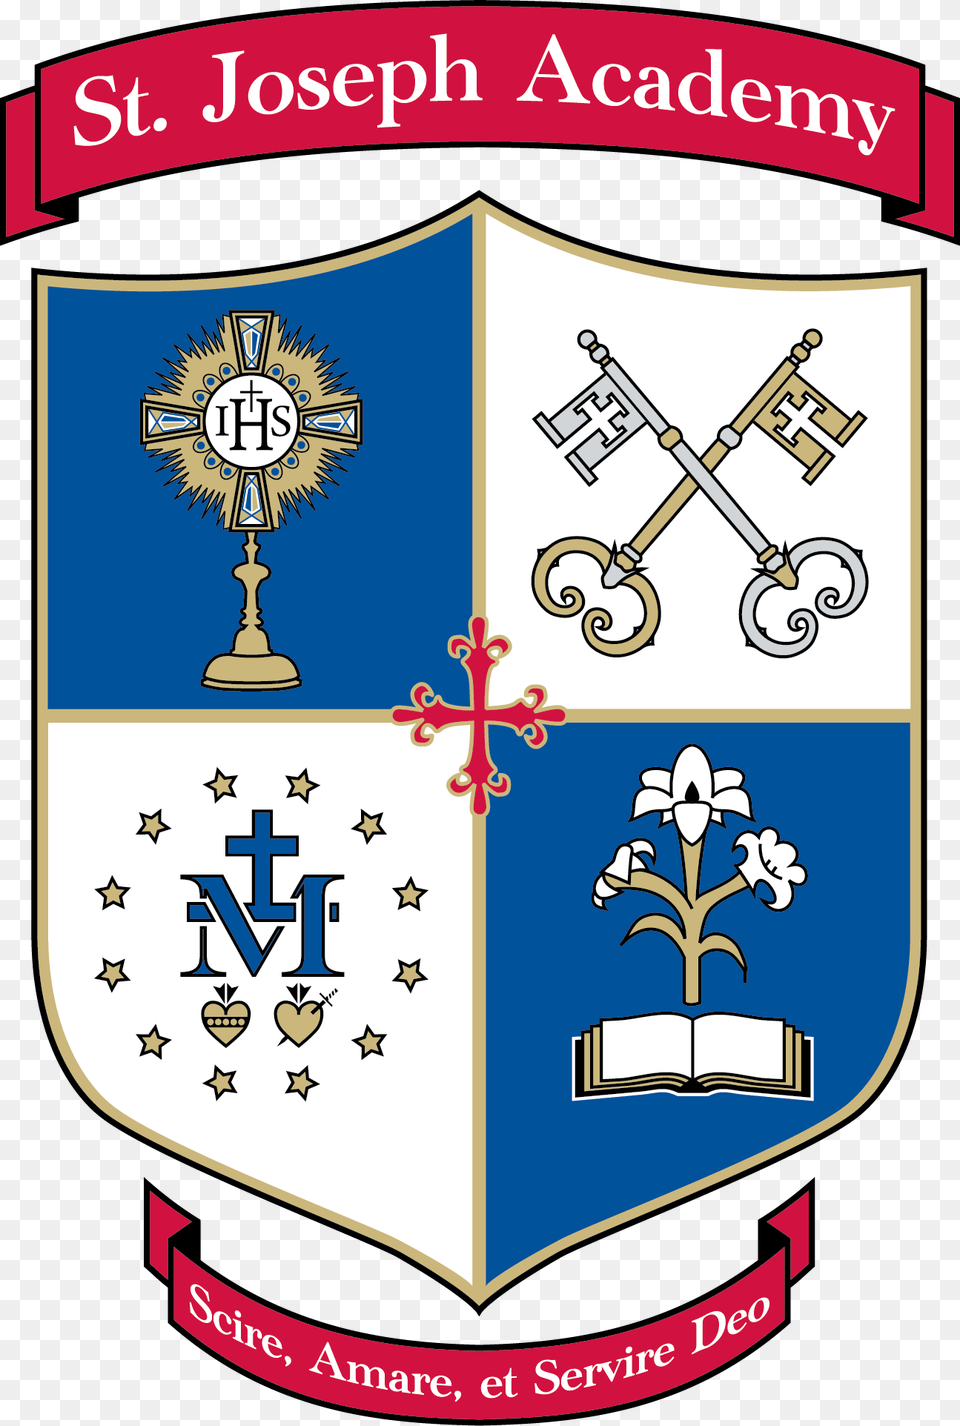 Crest No White Border Independent Catholic Mission Logos, Armor, Plant, Lawn Mower, Lawn Free Transparent Png